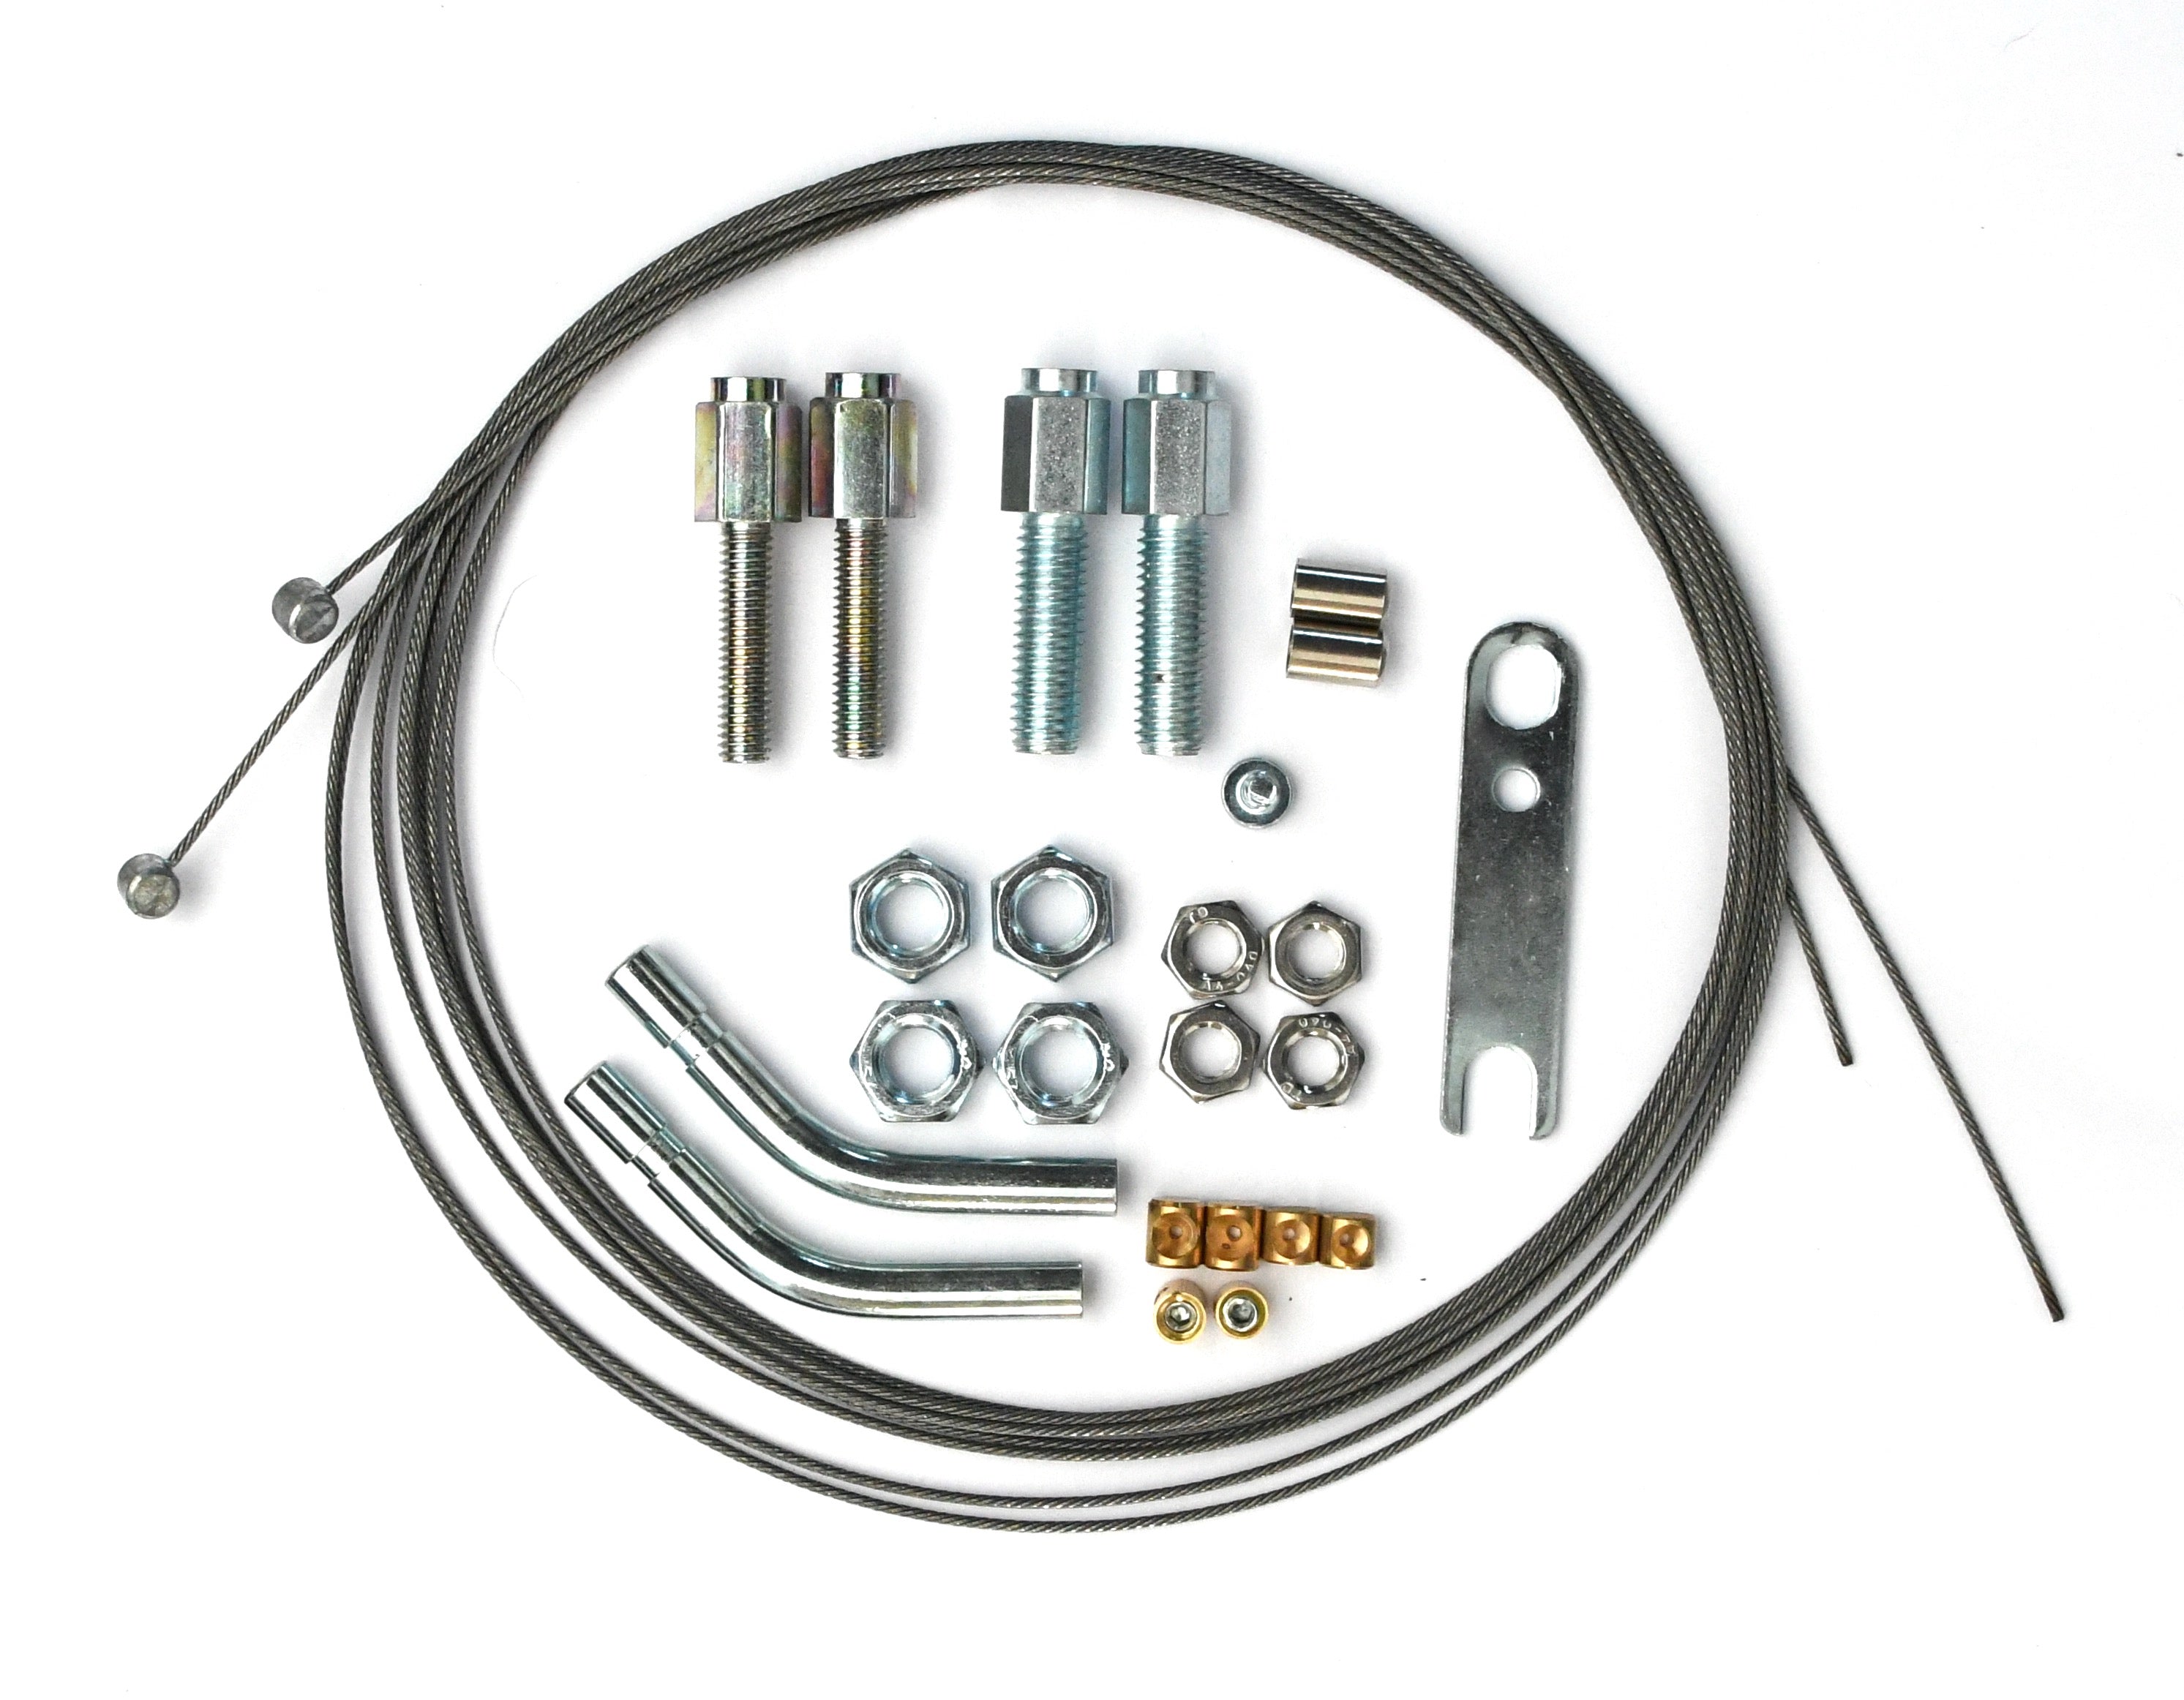 Venhill Universal Throttle Cable Kit for Domino XM2 Throttle